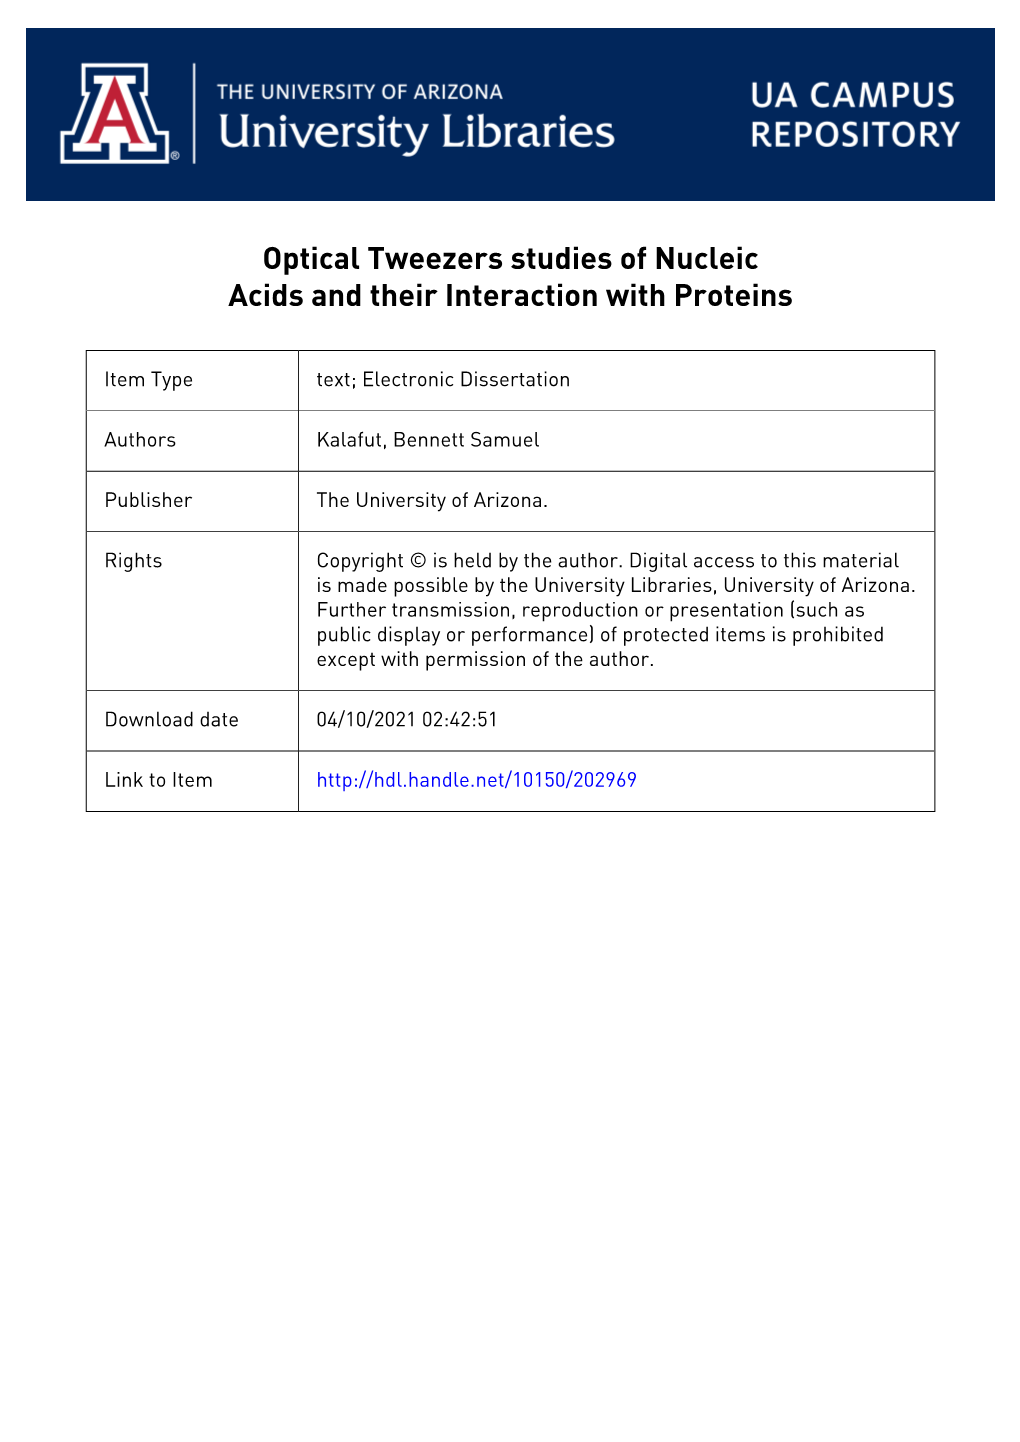 Optical Tweezers Studies of Nucleic Acids and Their Interaction with Proteins